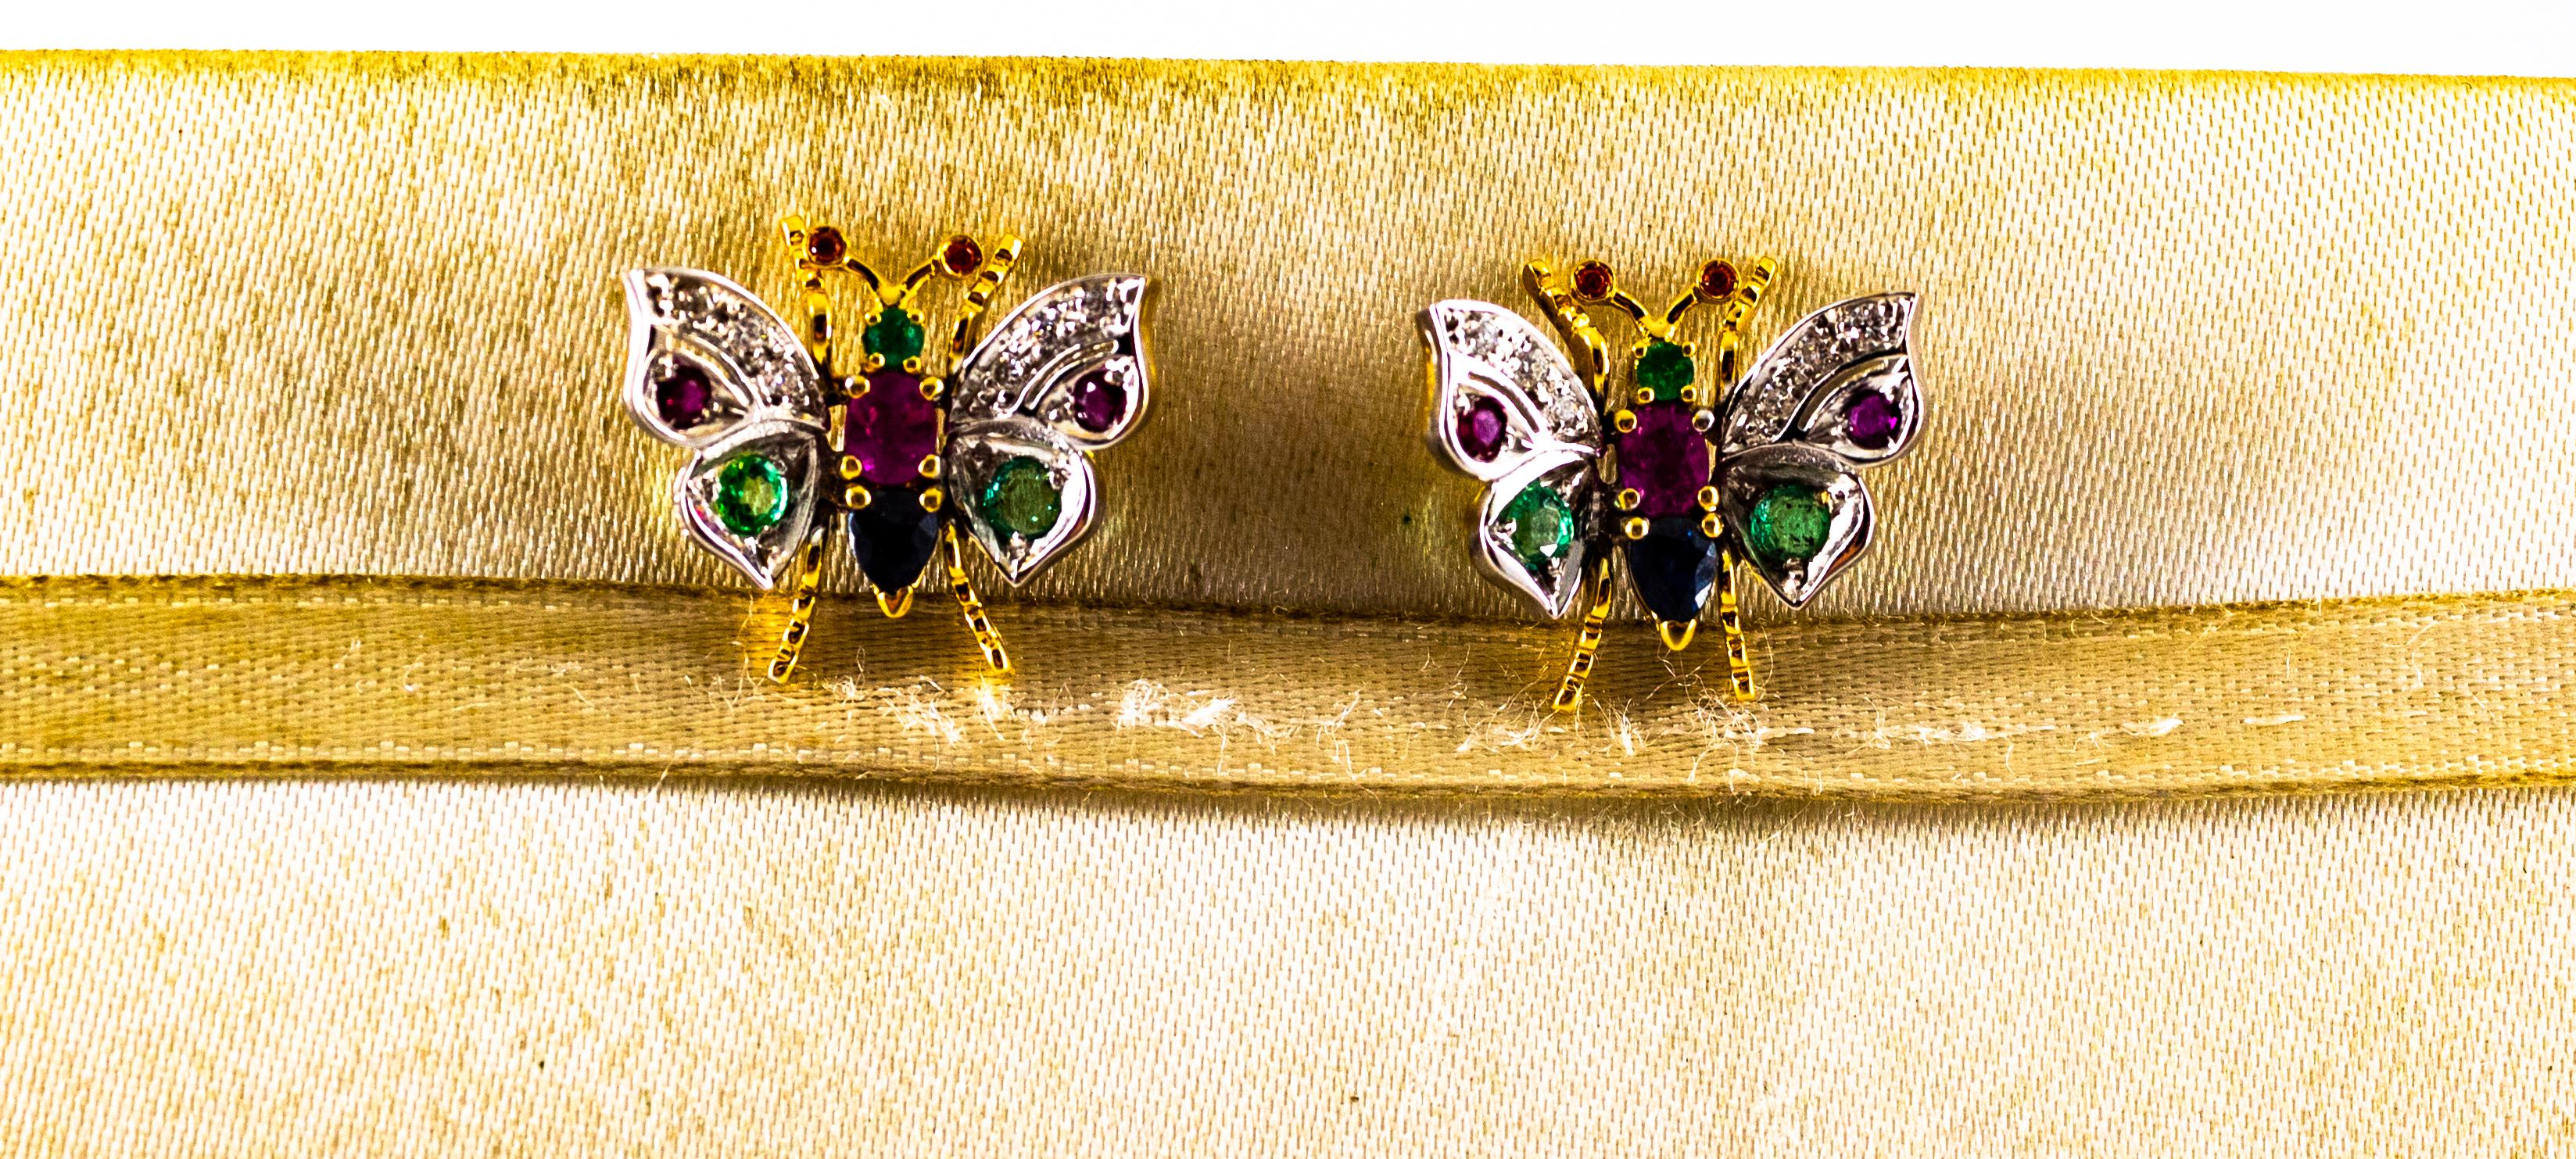 These Stud Earrings are made of 18K Yellow and White Gold.
These Earrings have 0.10 Carats of White Brilliant Cut Diamonds.
These Earrings have 0.30 Carats of Emeralds.
These Earrings have 0.60 Carats of Rubies.
These Earrings have 0.30 Carats of